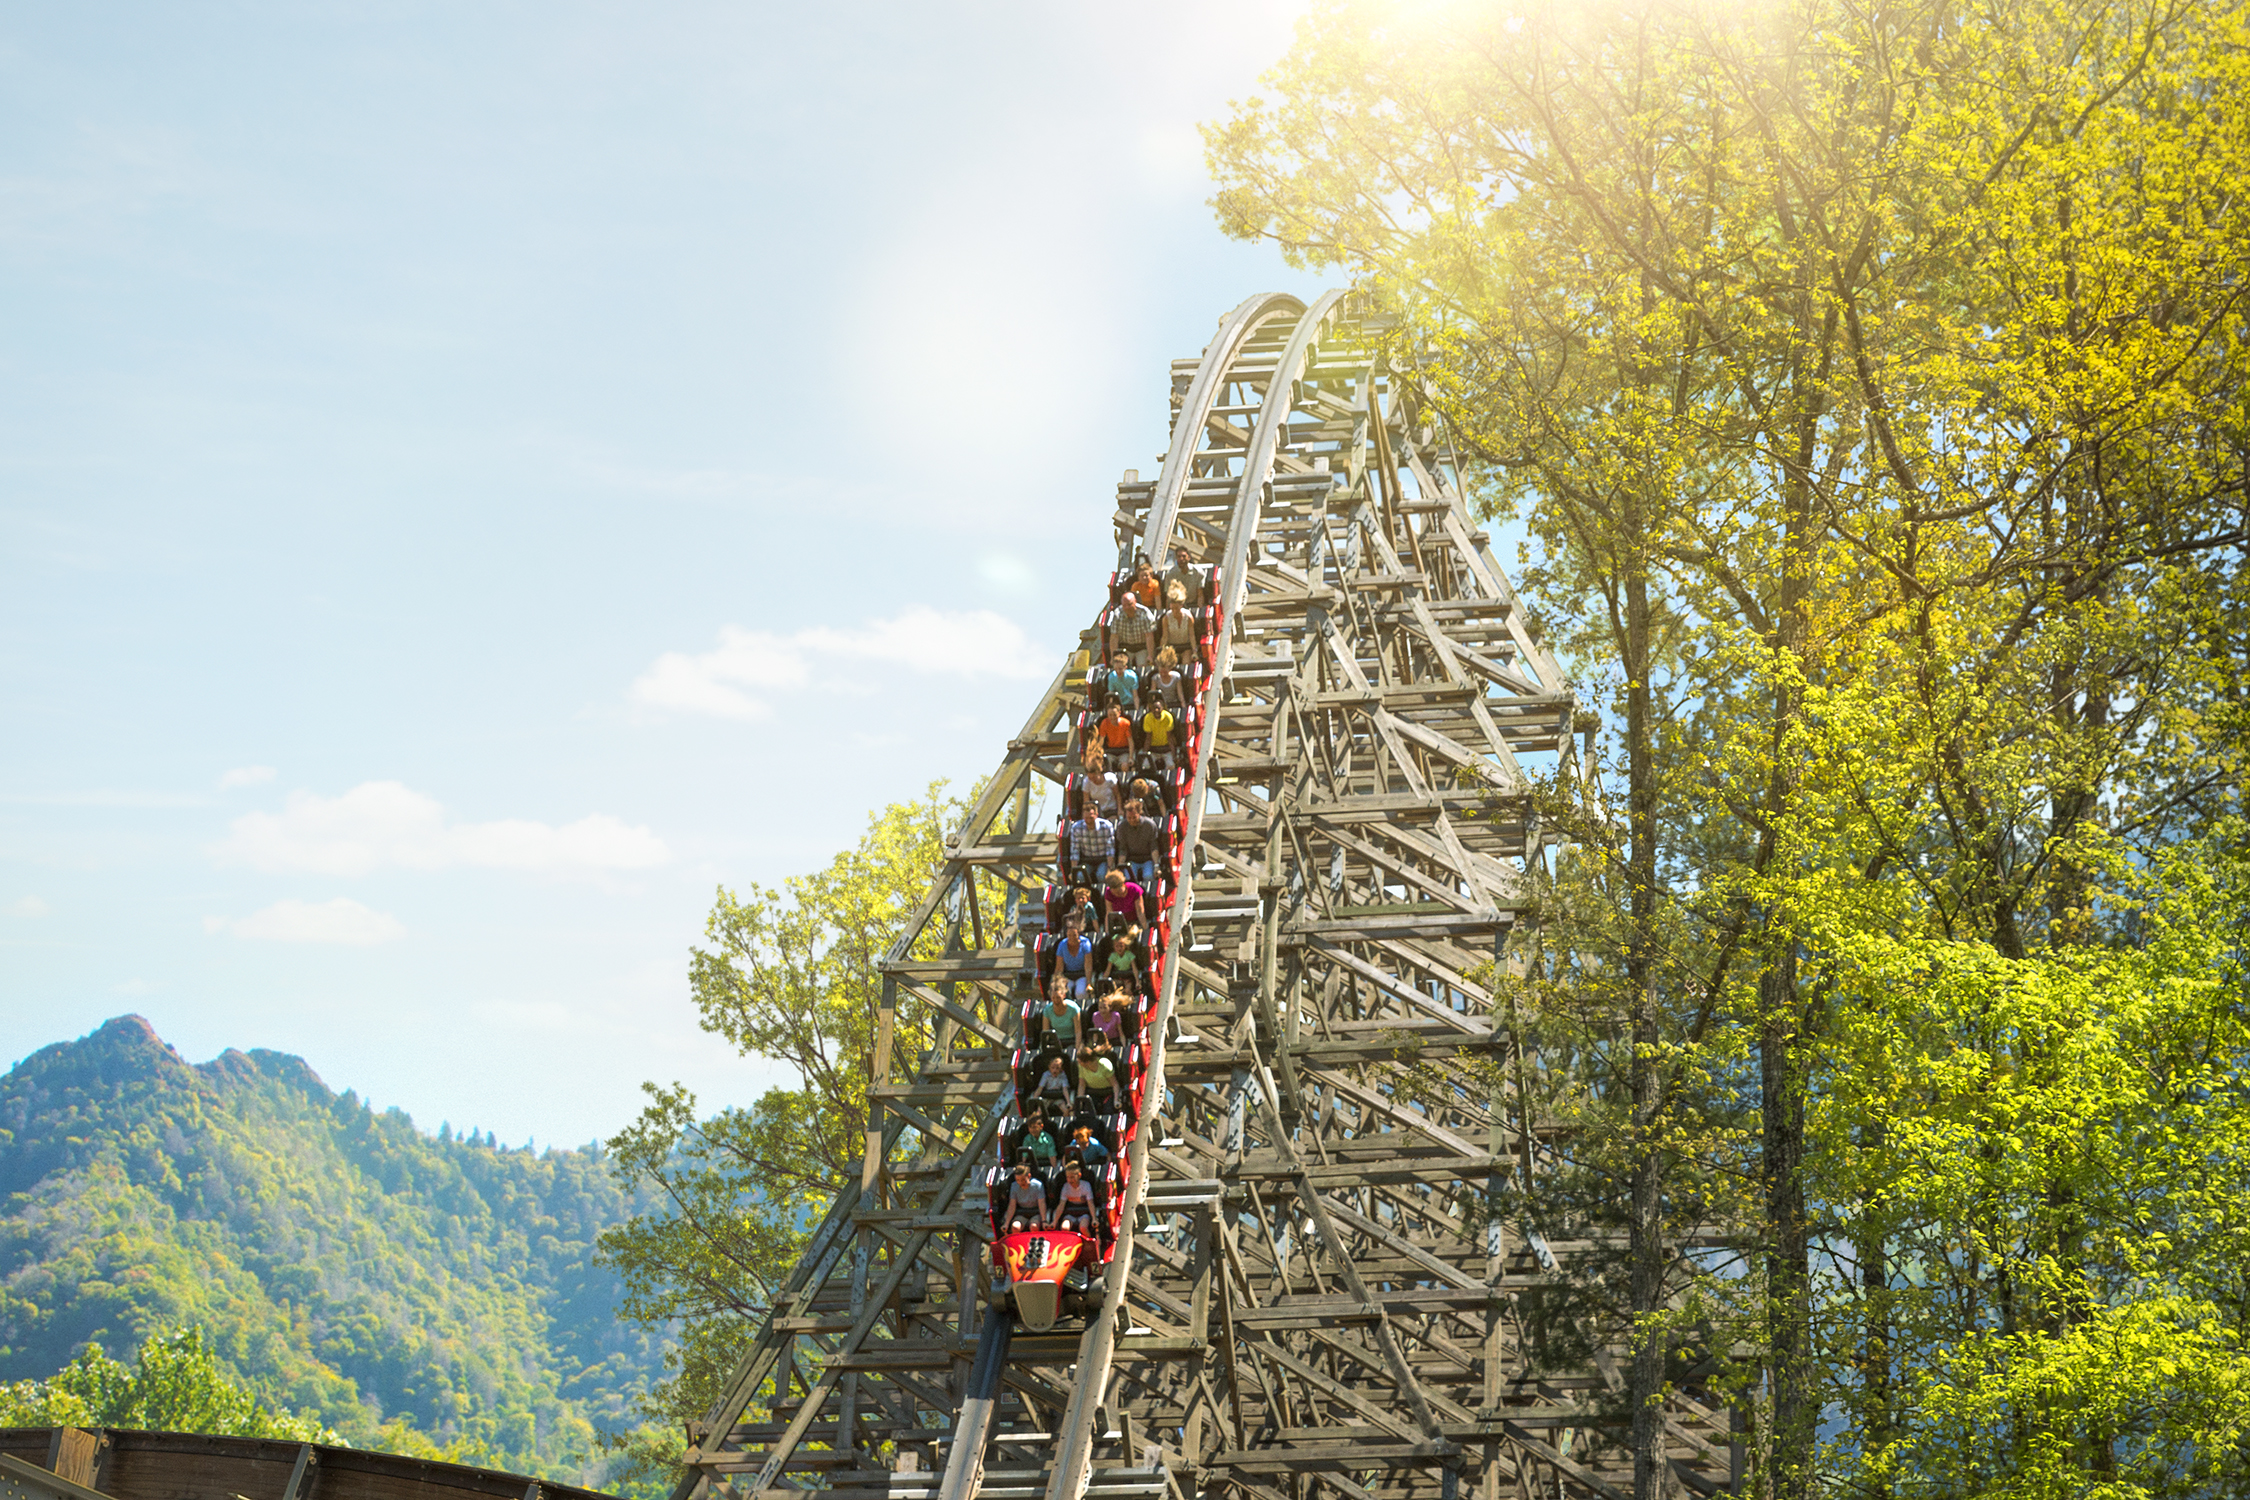 Guests enjoying a thrilling roller coaster ride at Dollywood Theme Park in Pigeon Forge, Tennessee, where guests staying at Xplorie participating properties can enjoy a free one-day ticket.